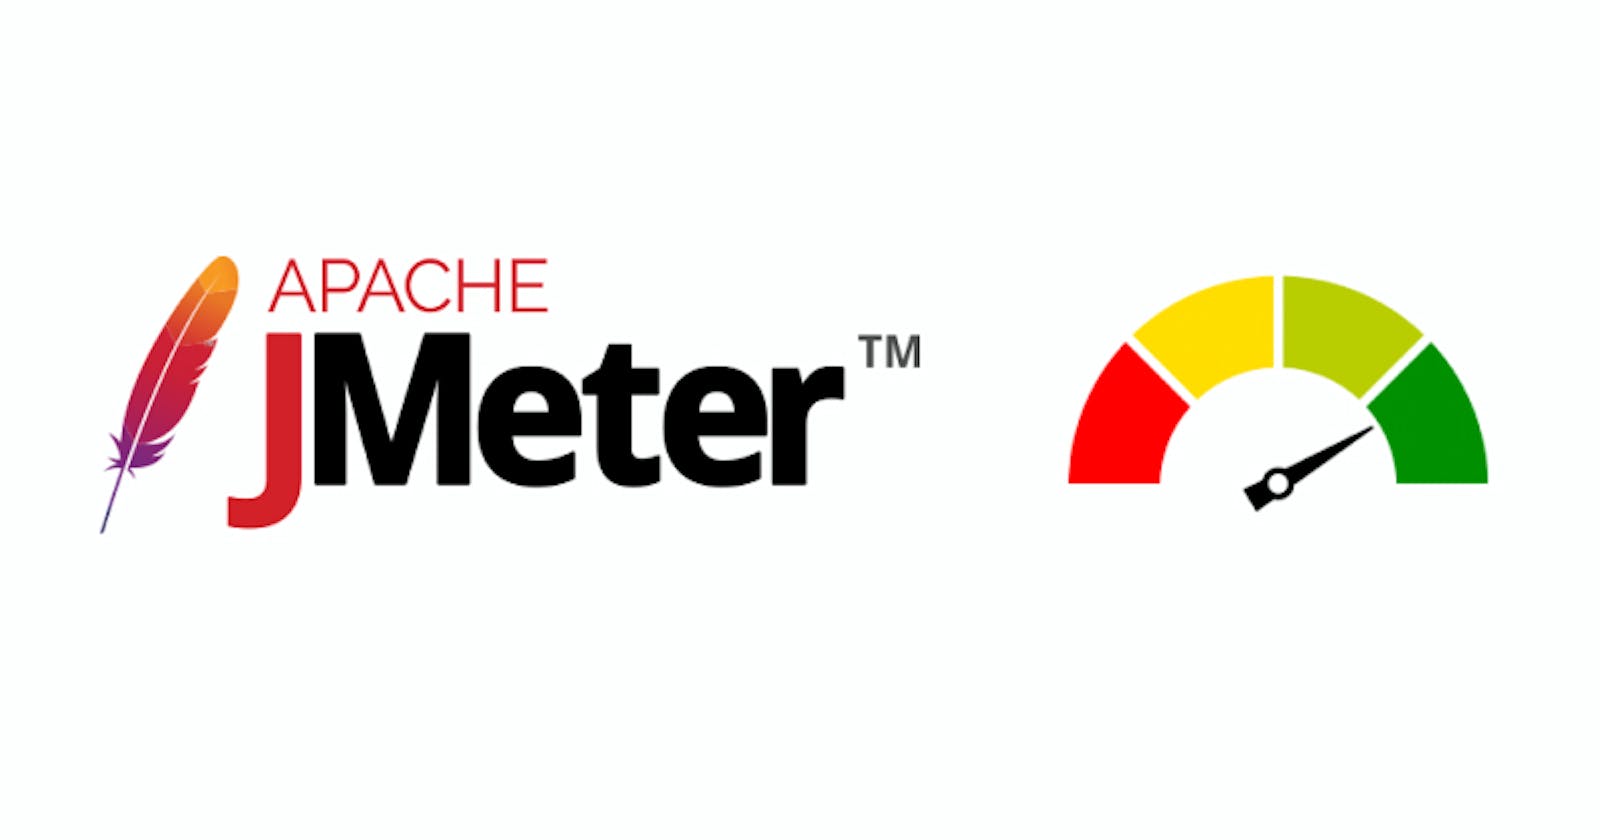 Performance Testing | End to End using JMeter